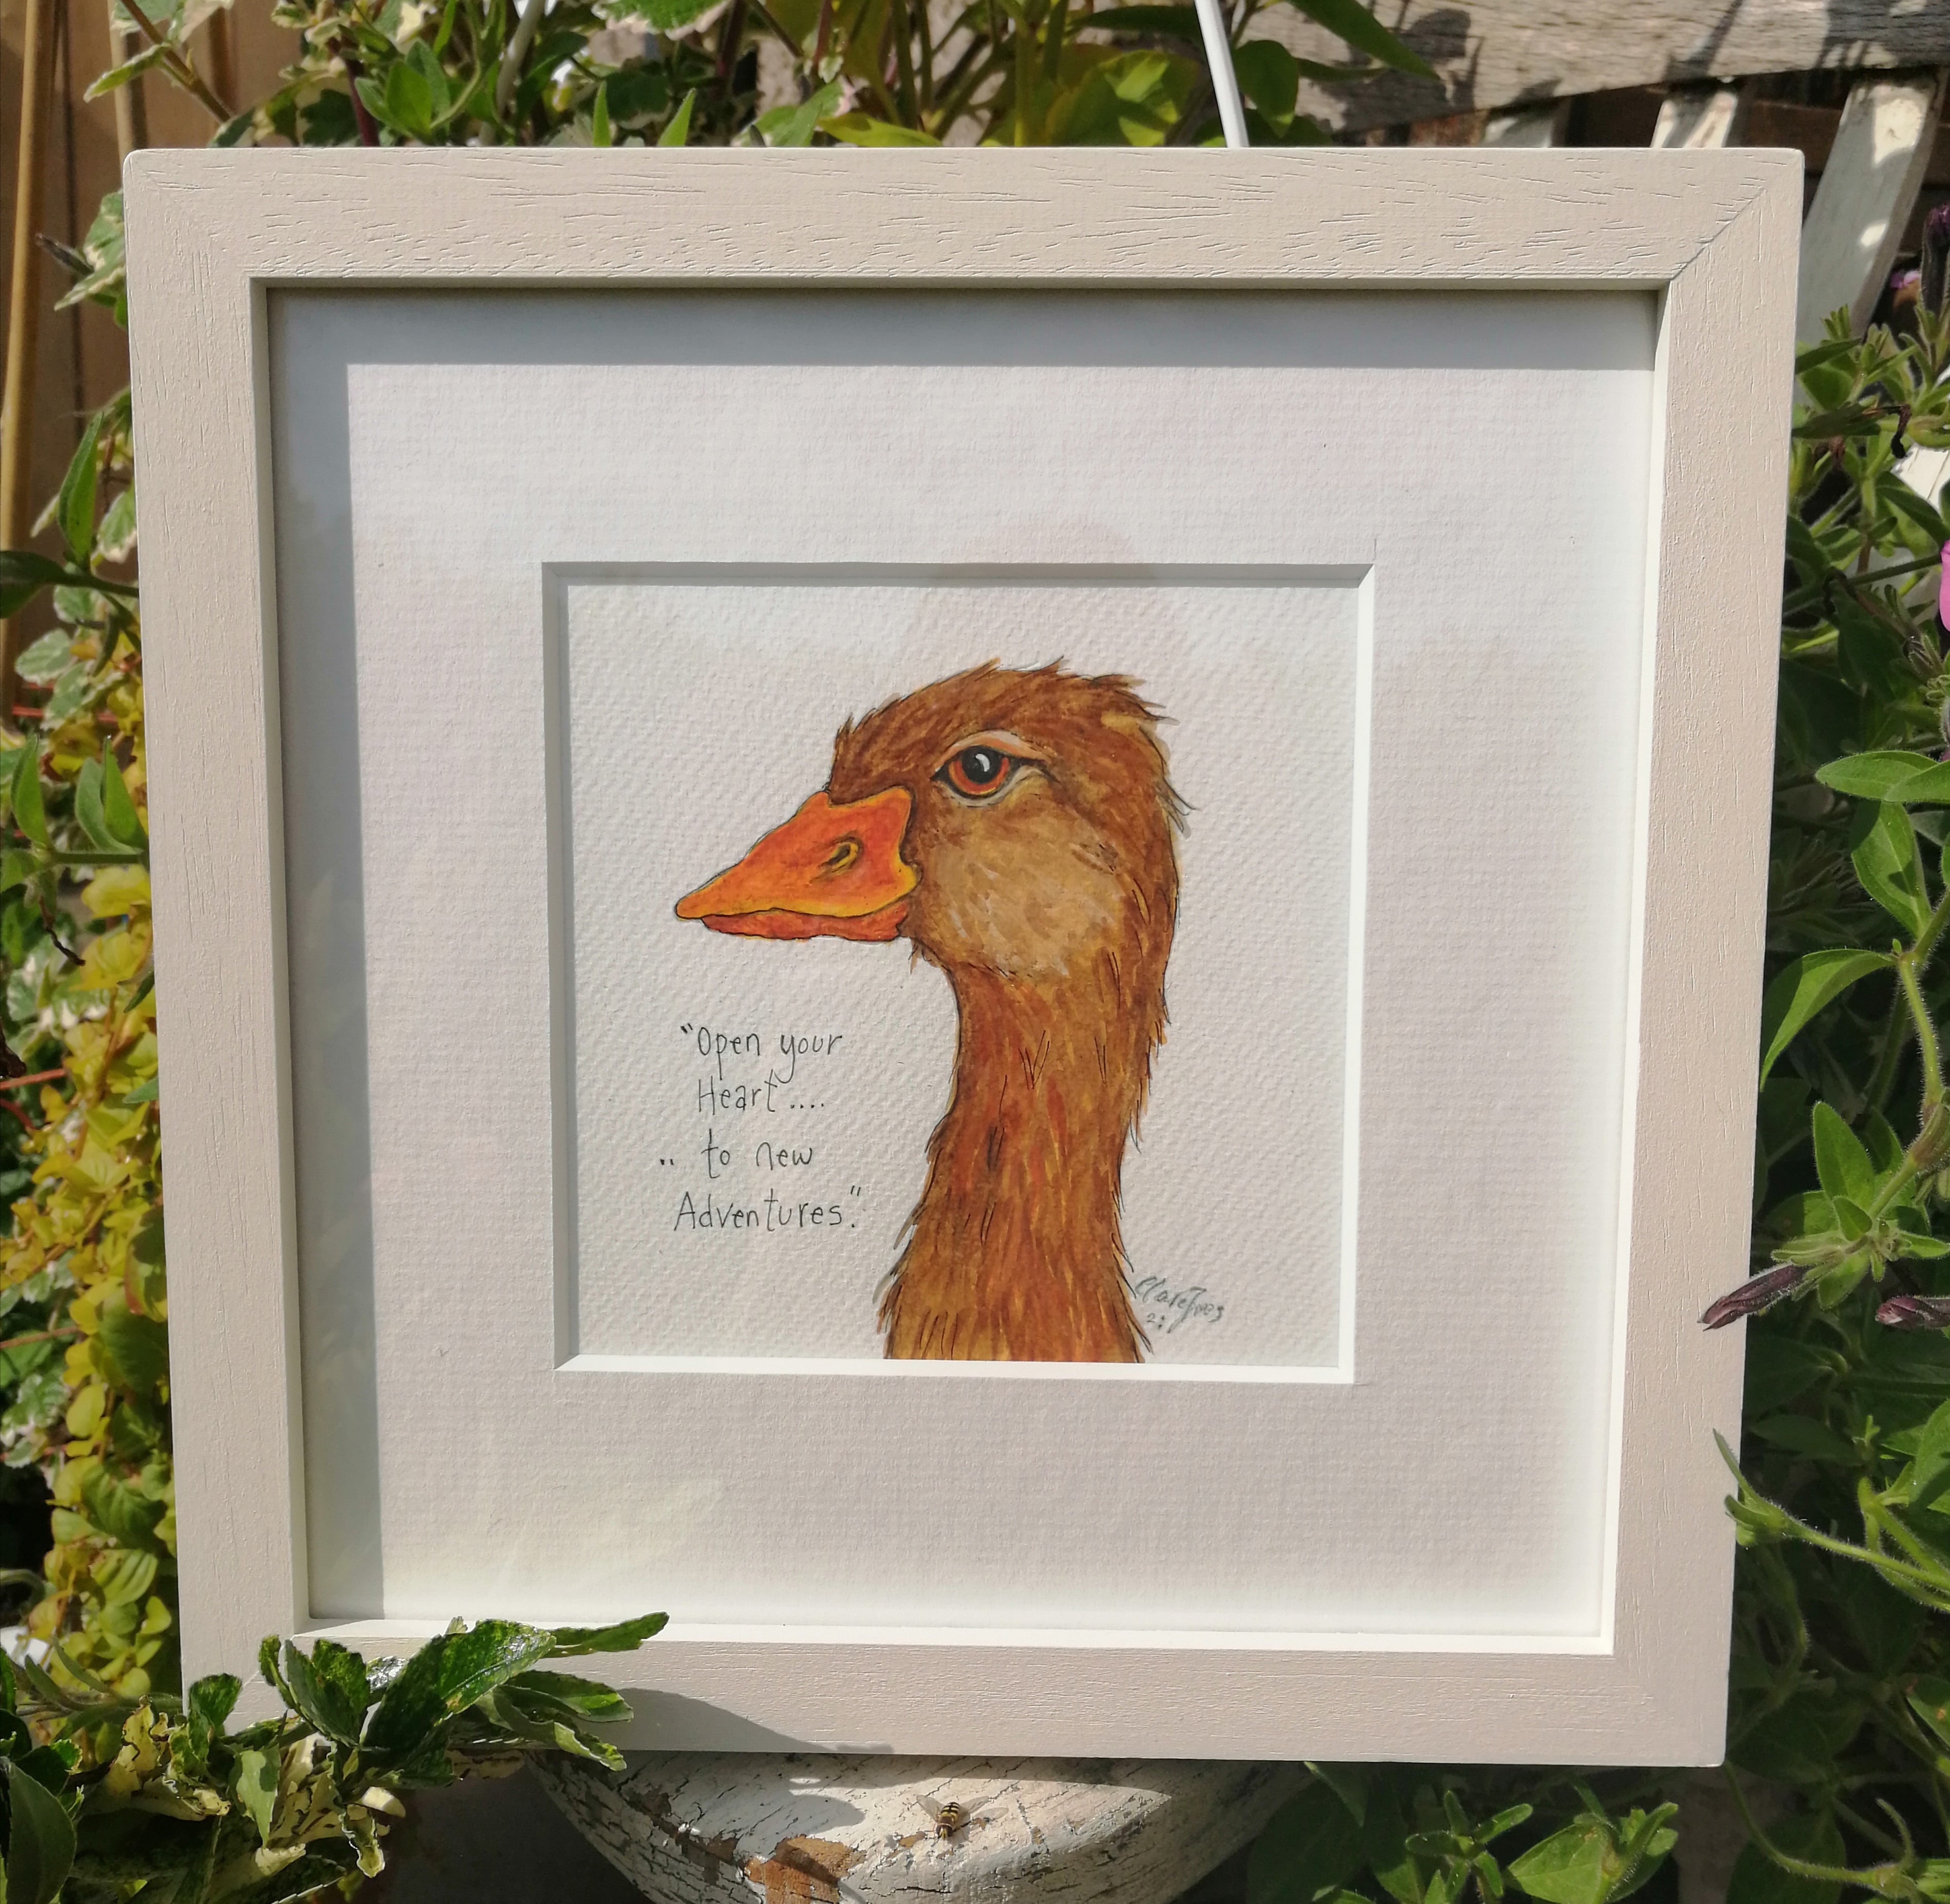 Tilly - Original watercolour signed and framed.